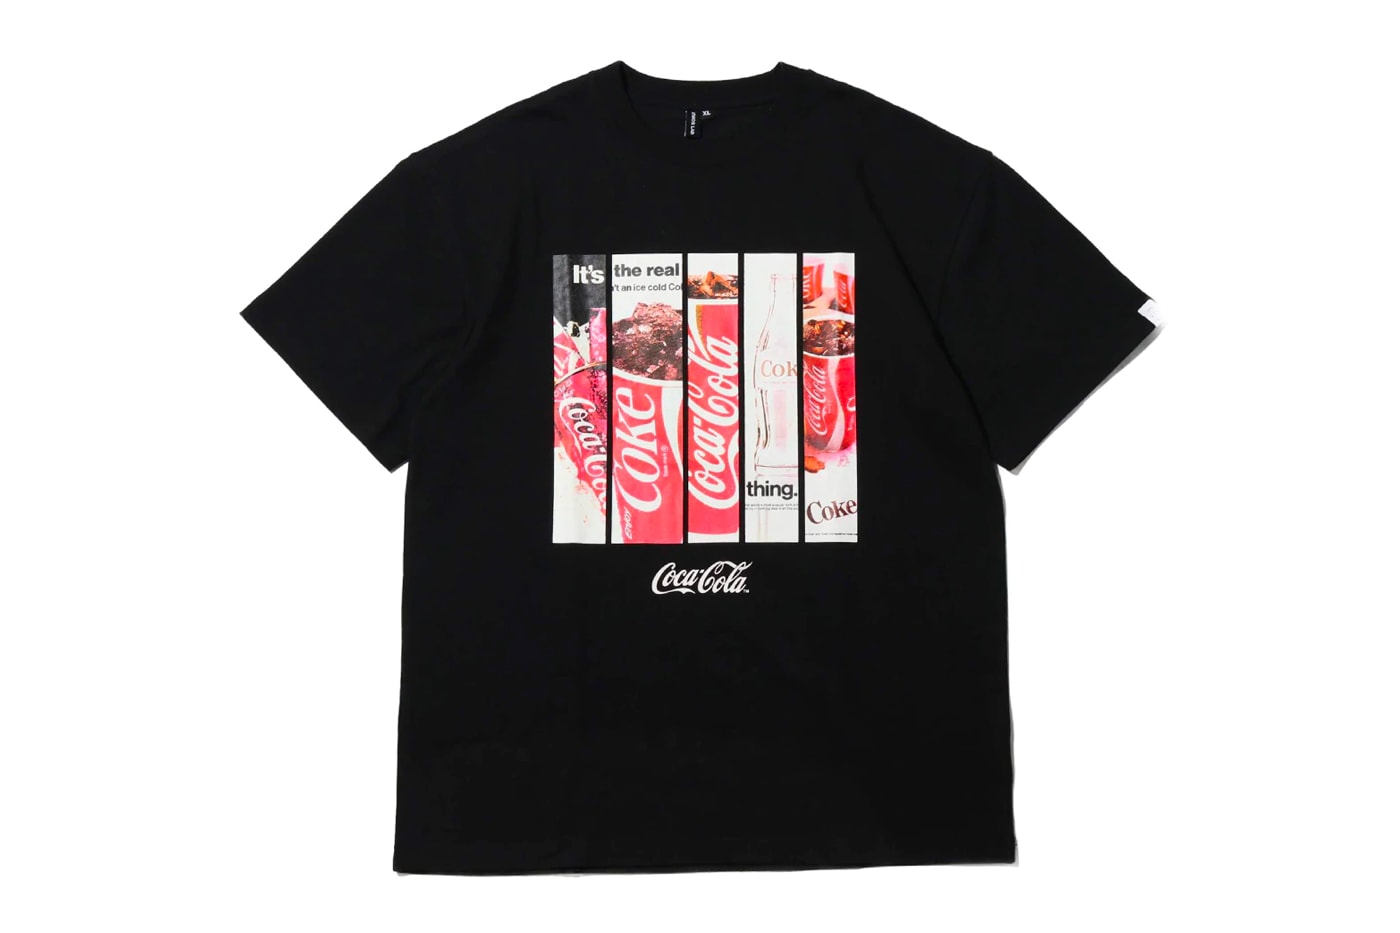 Coca Cola company Atmos Lab Fall Winter 2019 Capsule Collection soft drink beverage black white red apparel collaboration logos Japan